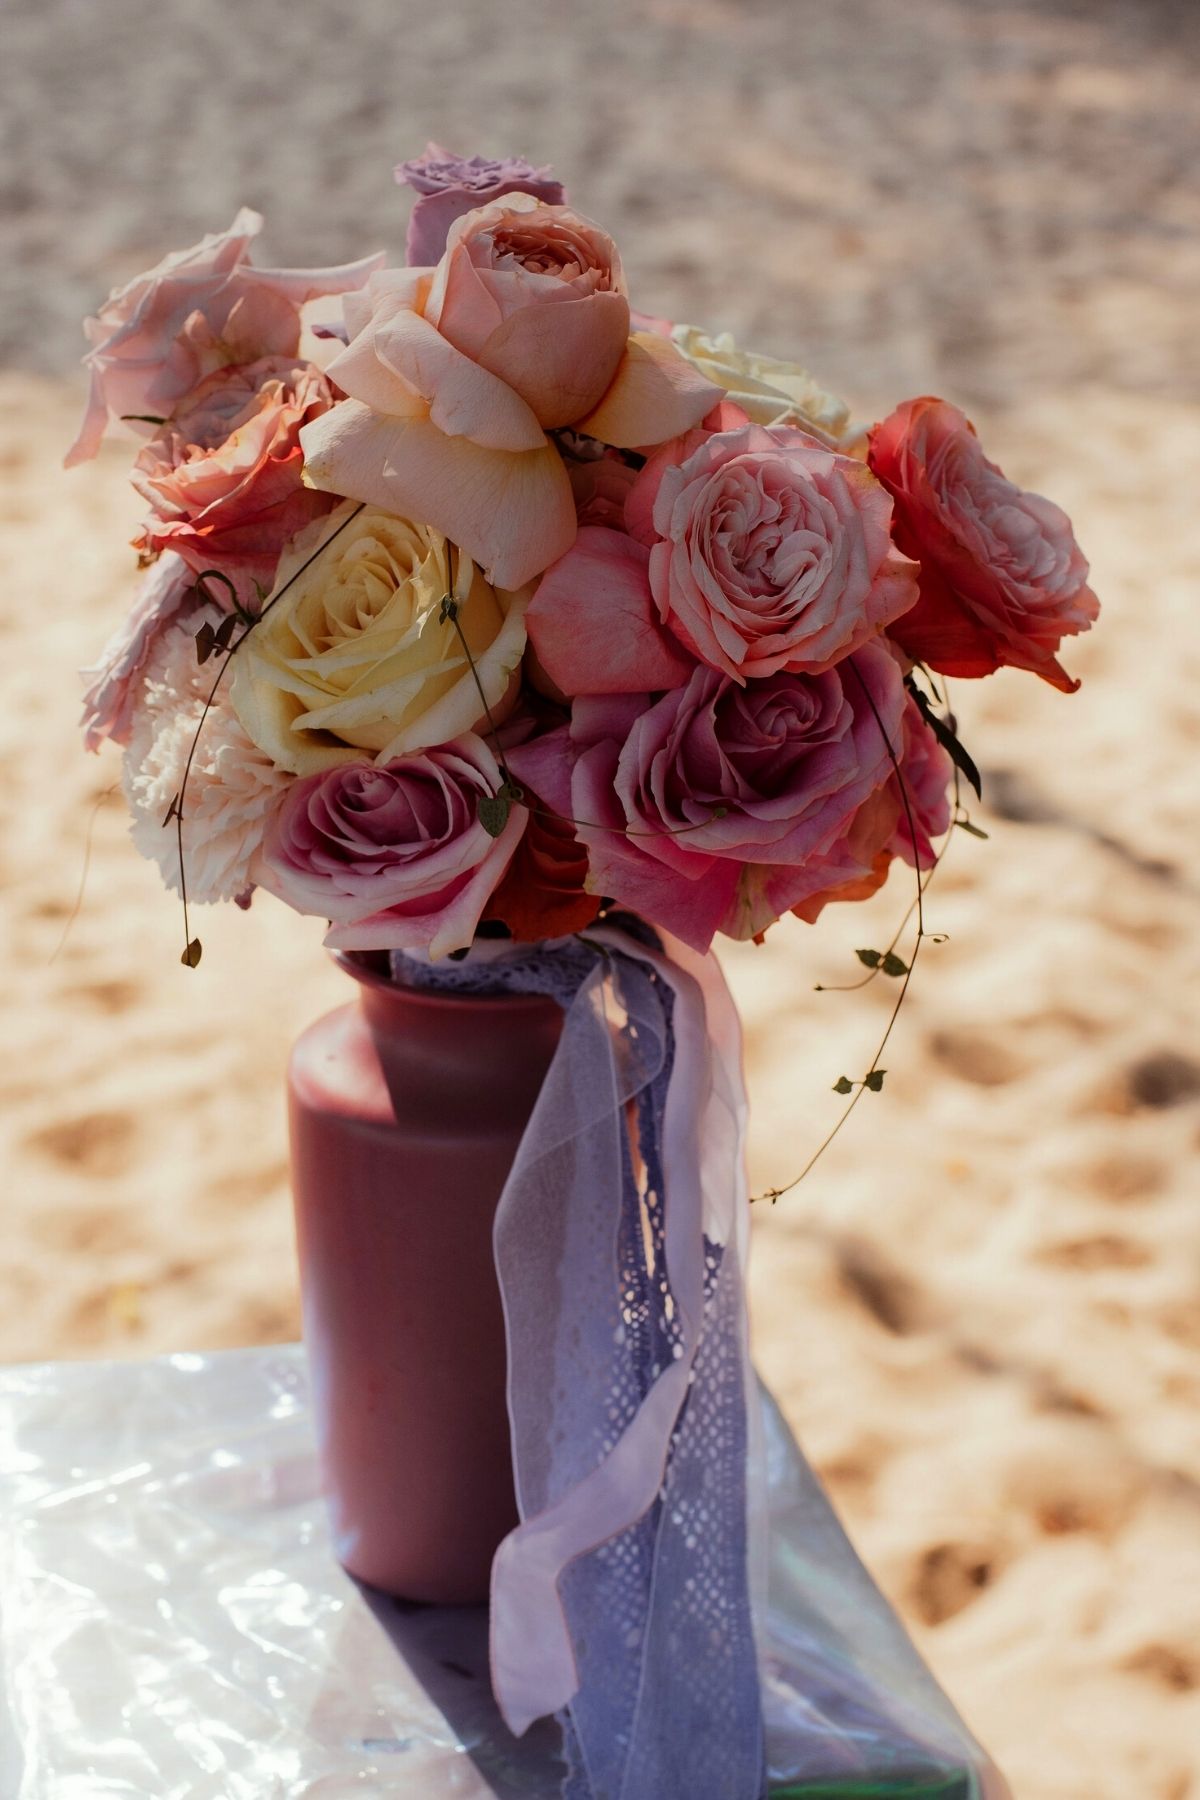 Inspirational Shoot With Gorgeous Decofresh Roses and Carnations - Blog on Thursd (39)